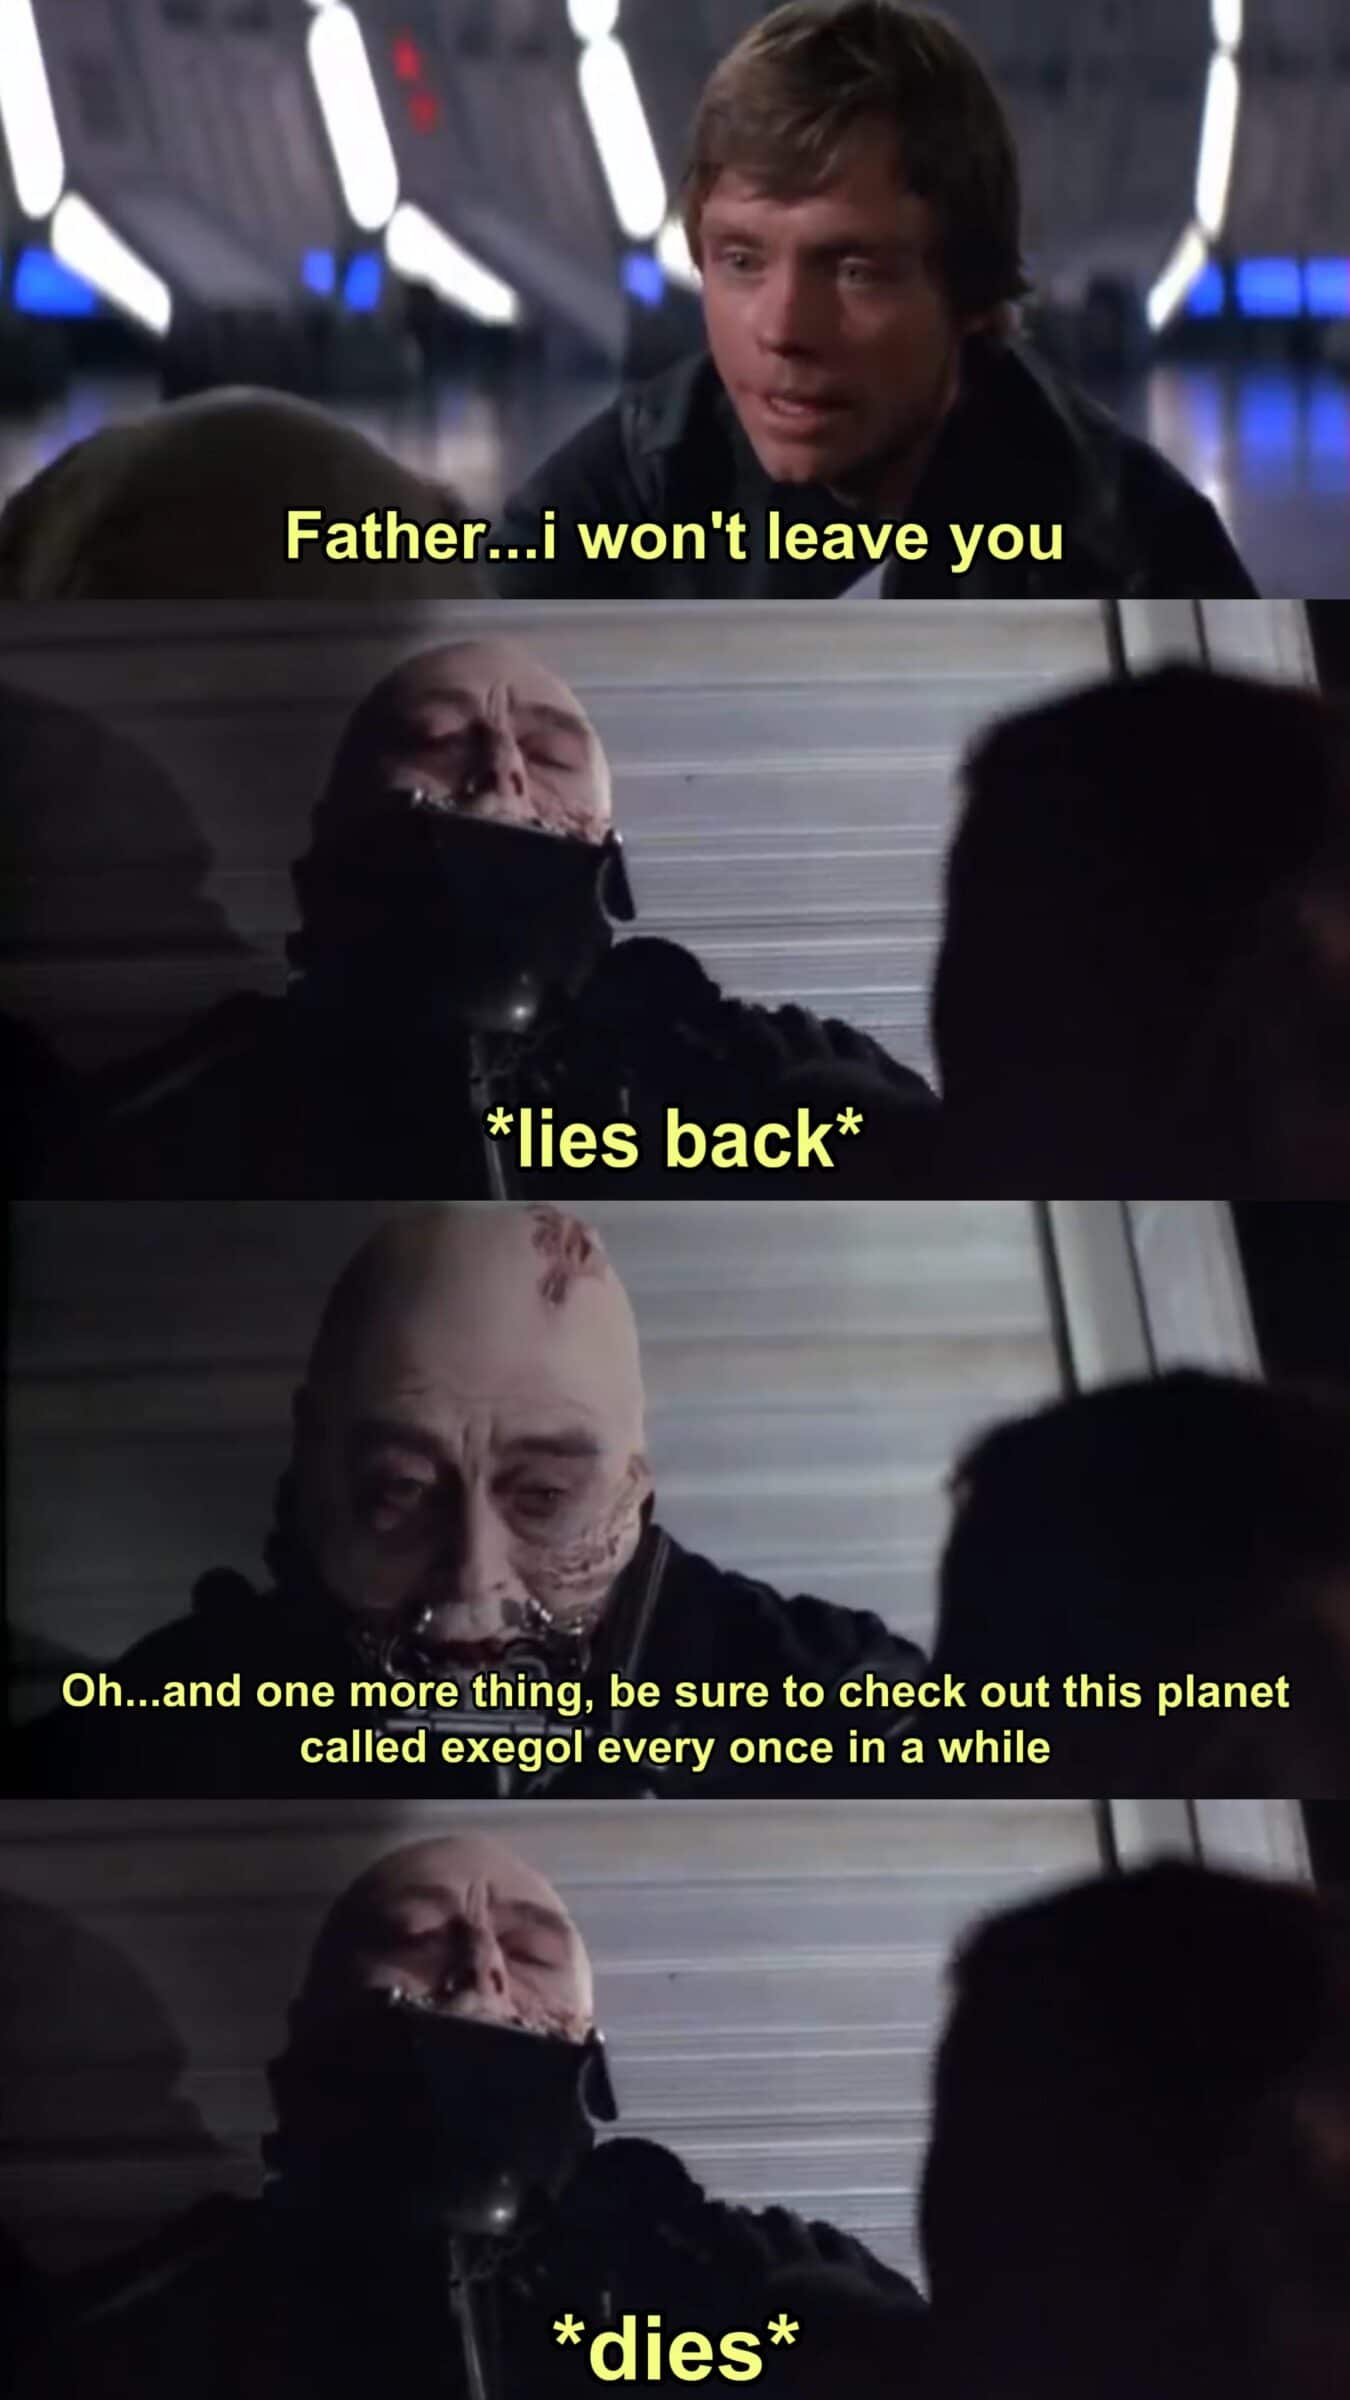 Ot-memes, Palpatine, Exegol, Skywalker, Weird Fan, Sequels Star Wars Memes Ot-memes, Palpatine, Exegol, Skywalker, Weird Fan, Sequels text: Father . .i won't leave you *lies back* Oh...and one more,thing, be sure to check out this planet called exegolevery once in a while *dies* 